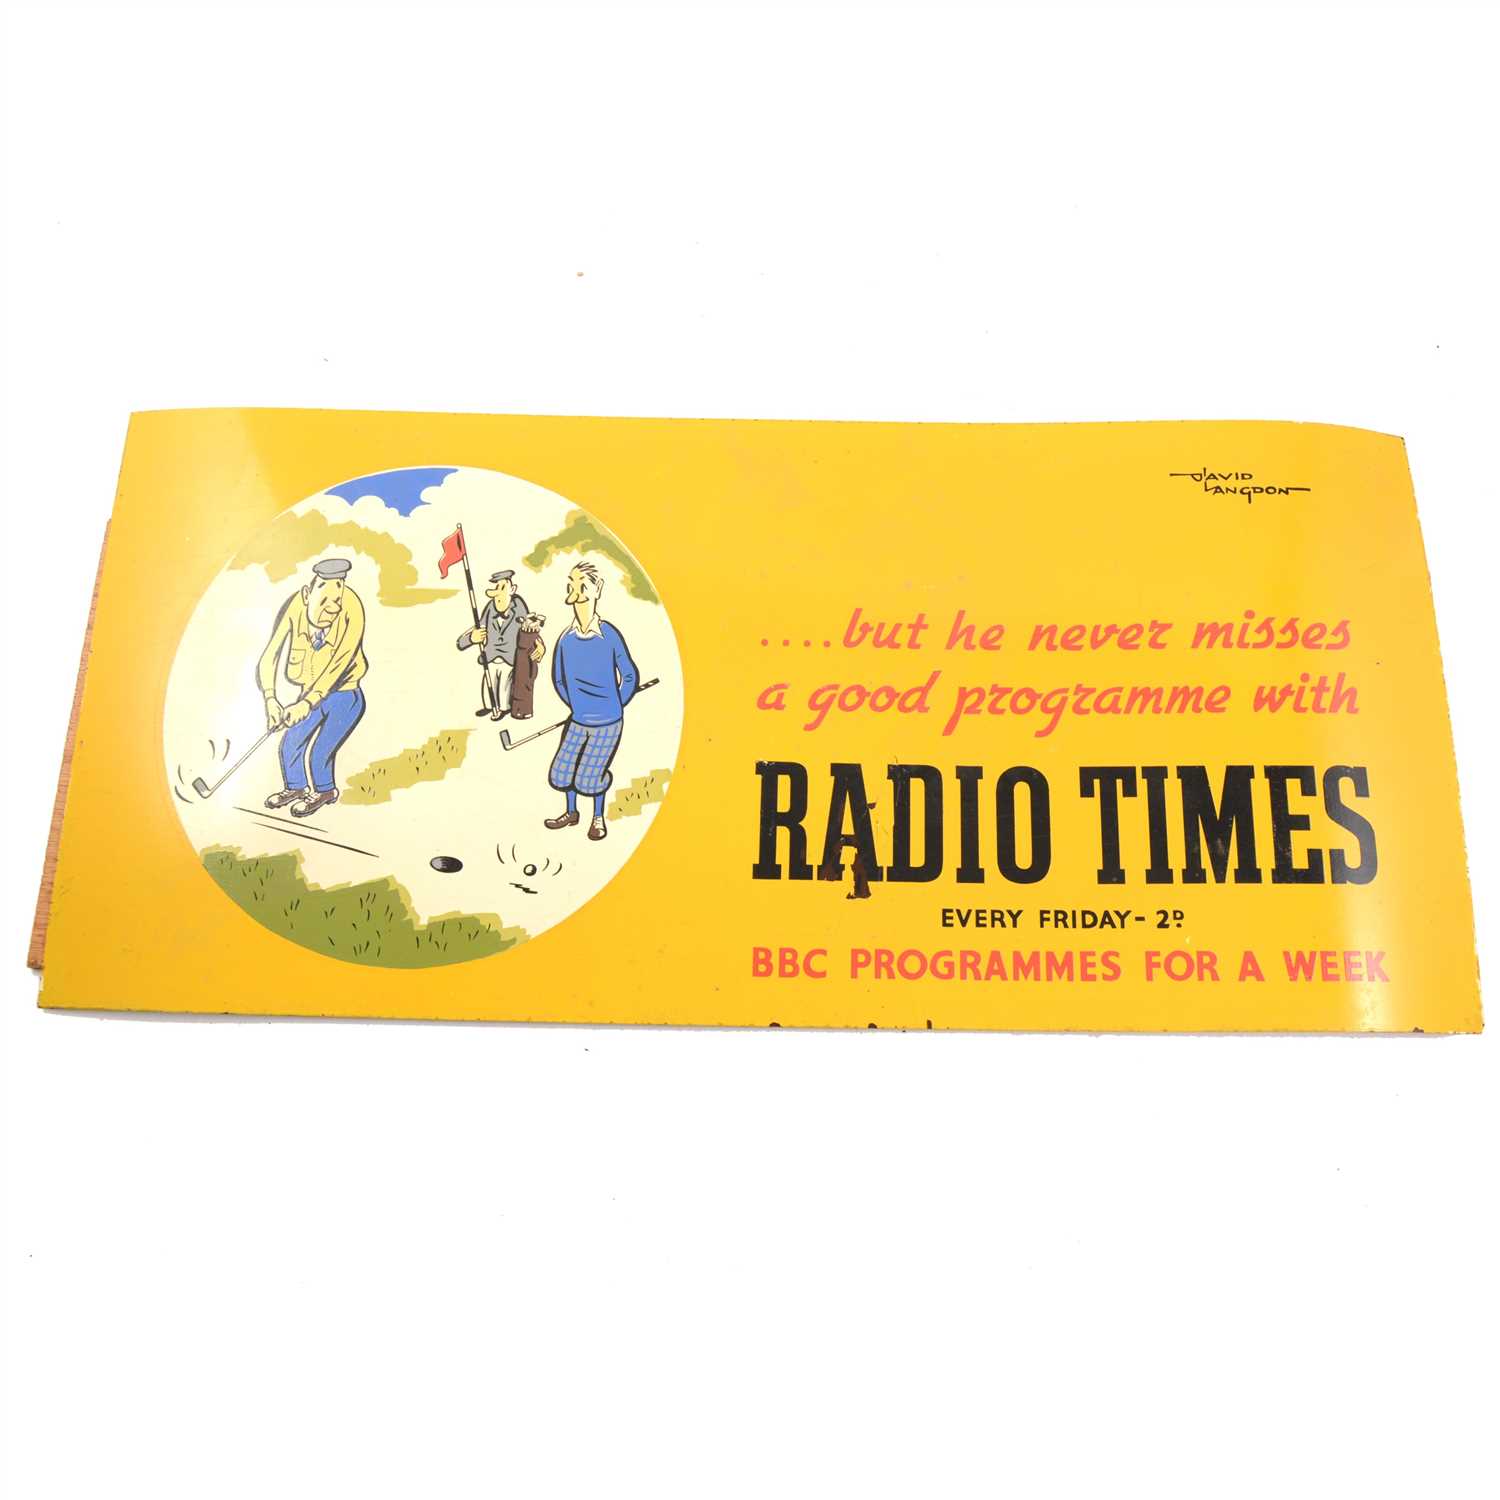 Lot 222 - A shop window advertisement for Radio Times, with golfing cartoon by David Langton